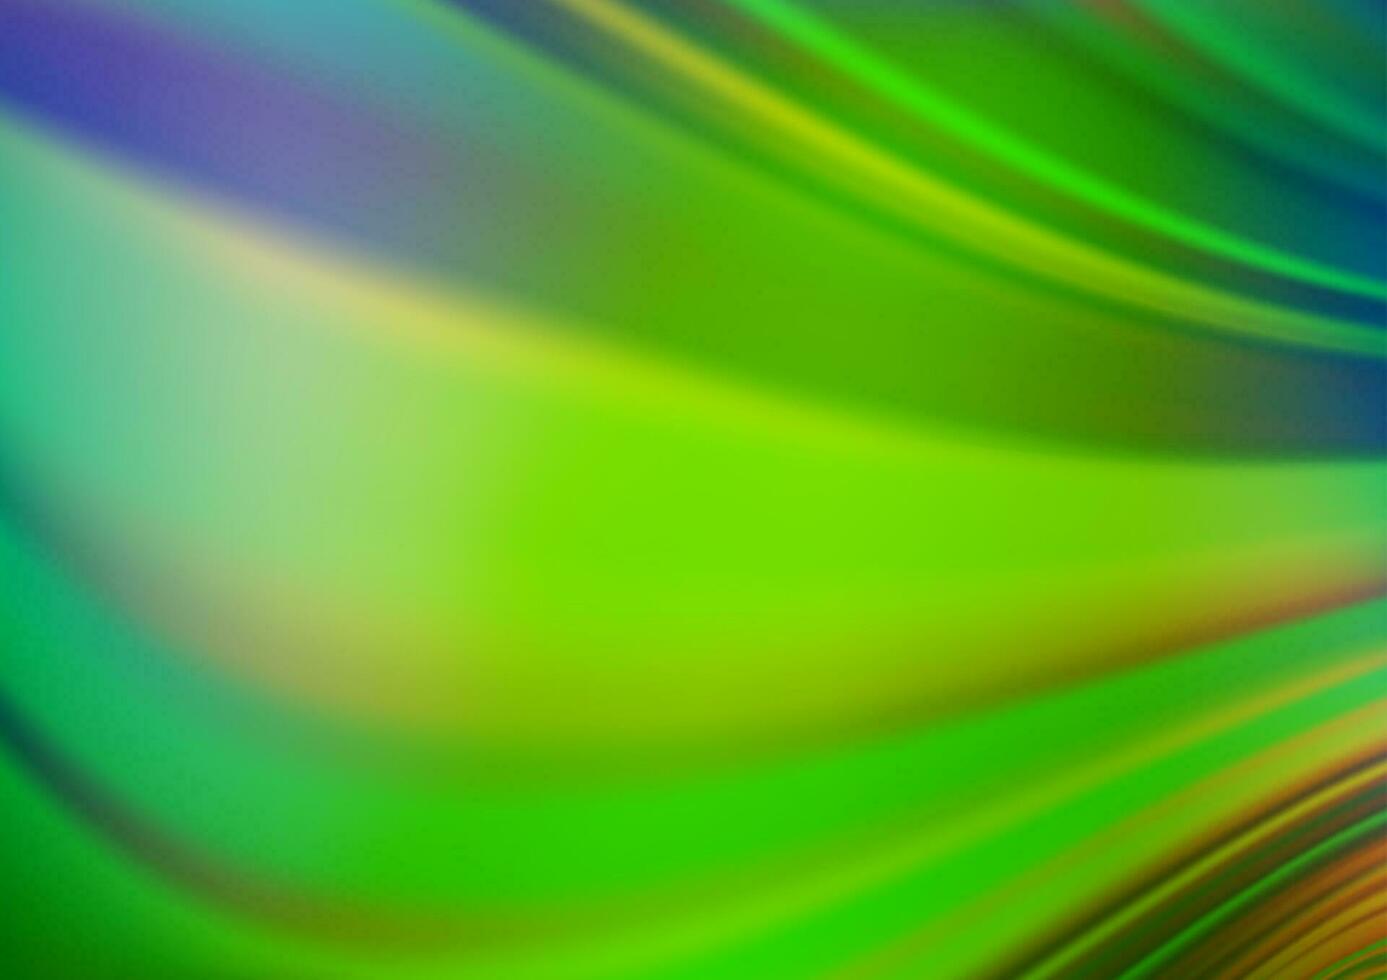 Light Blue, Green vector blurred shine abstract pattern.